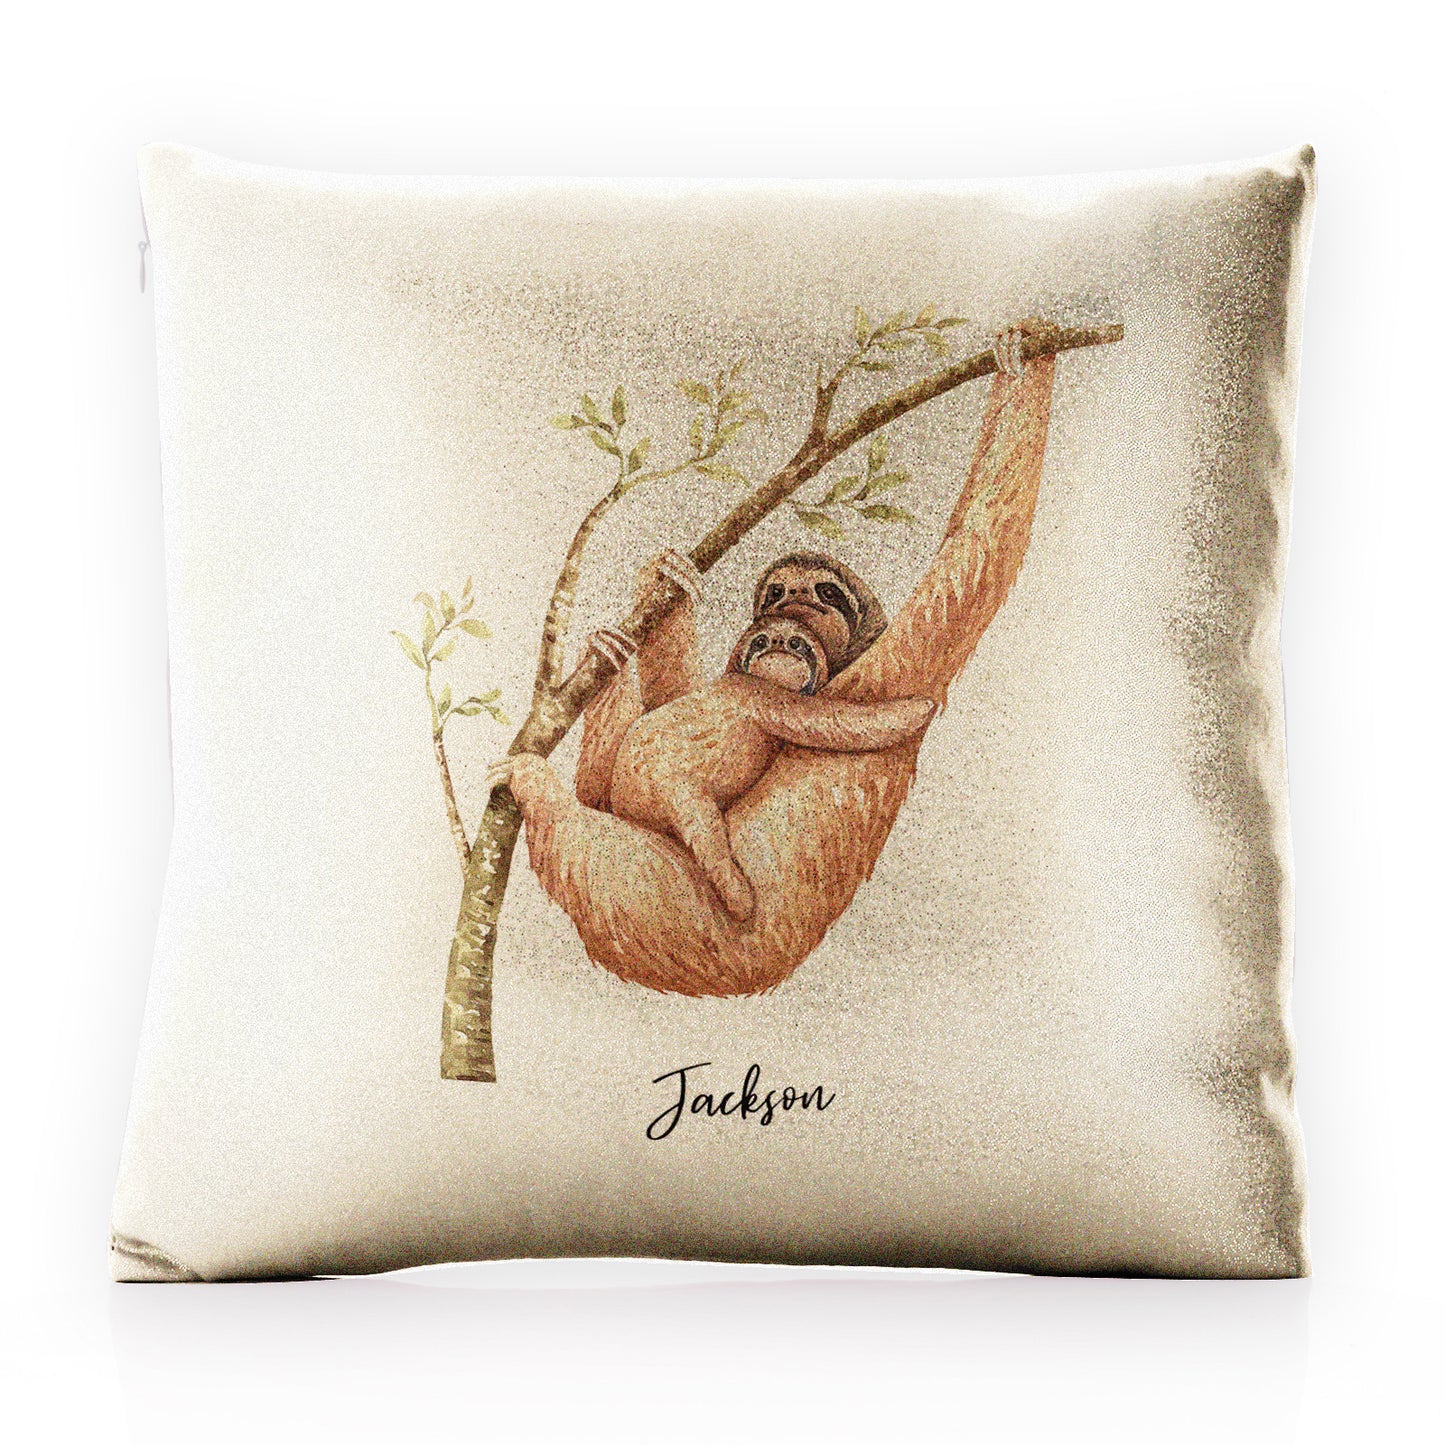 Personalised Glitter Cushion with Welcoming Text and Climbing Mum and Baby Sloths